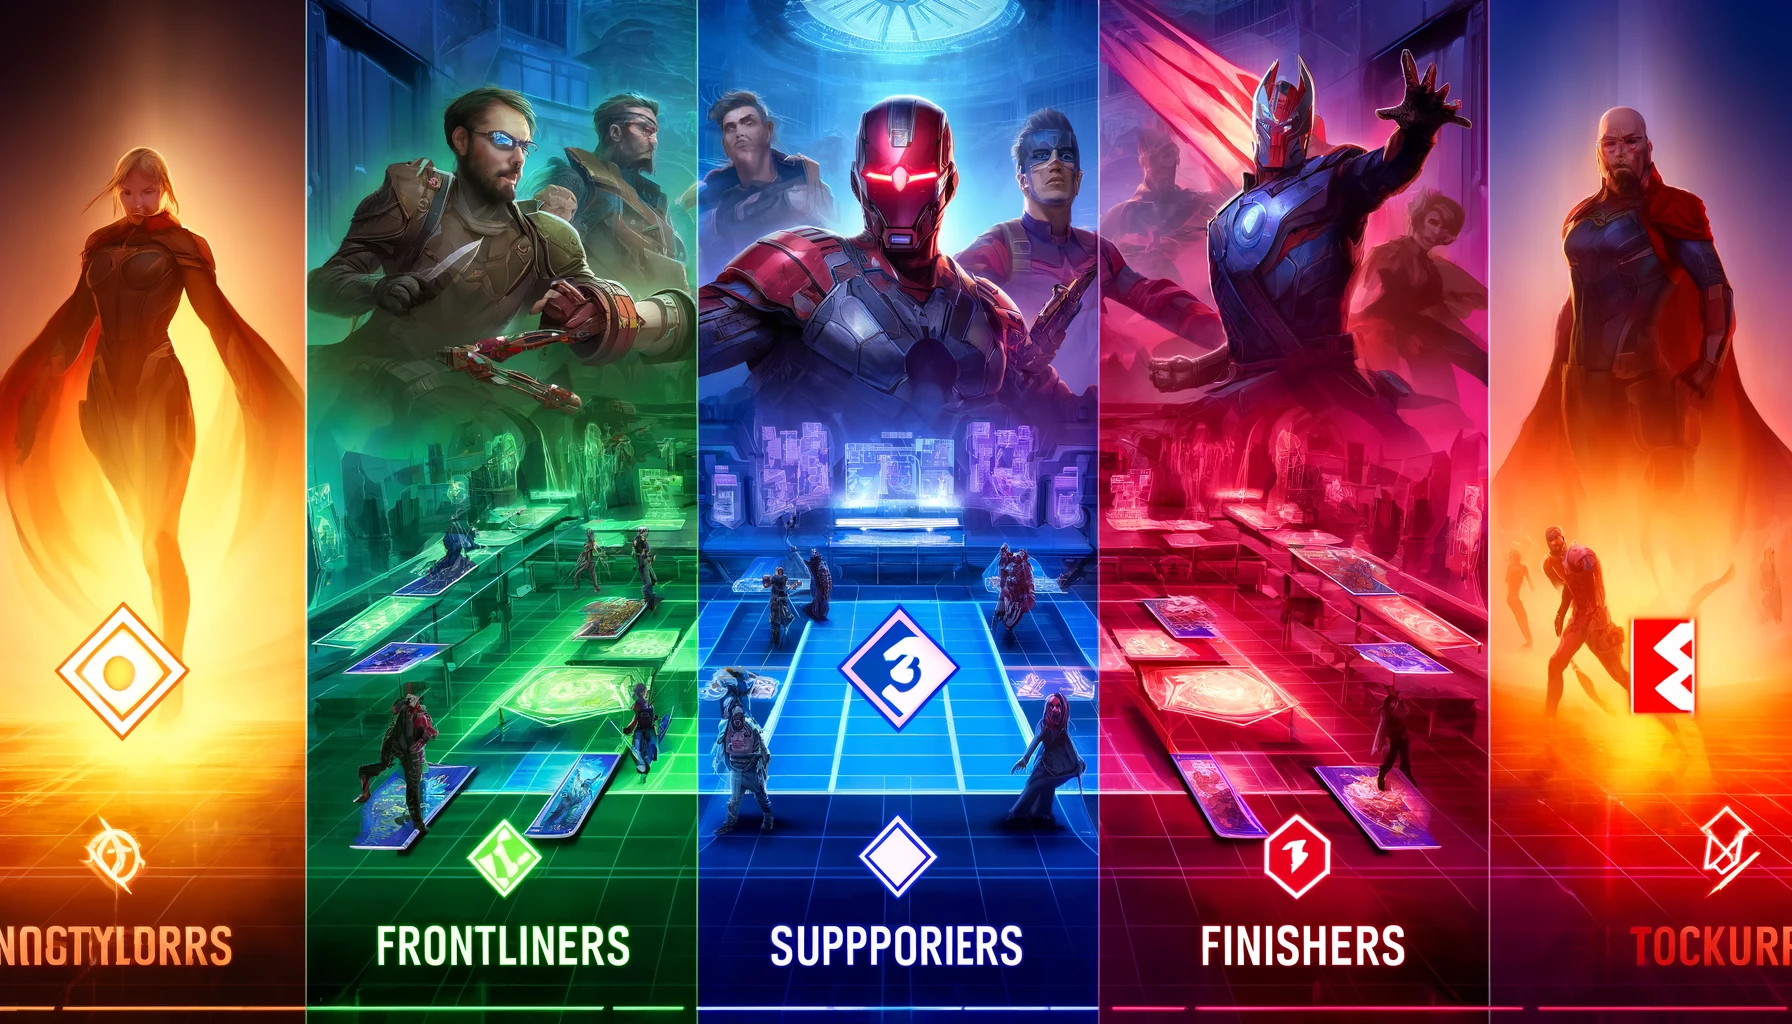 A wide-format image depicting the strategic roles of cards in Marvel Snap, featuring three distinct zones: Frontliners in combat-ready poses, Supporters with strategic abilities, and Finishers in victorious actions, all set in a futuristic, vibrant setting.